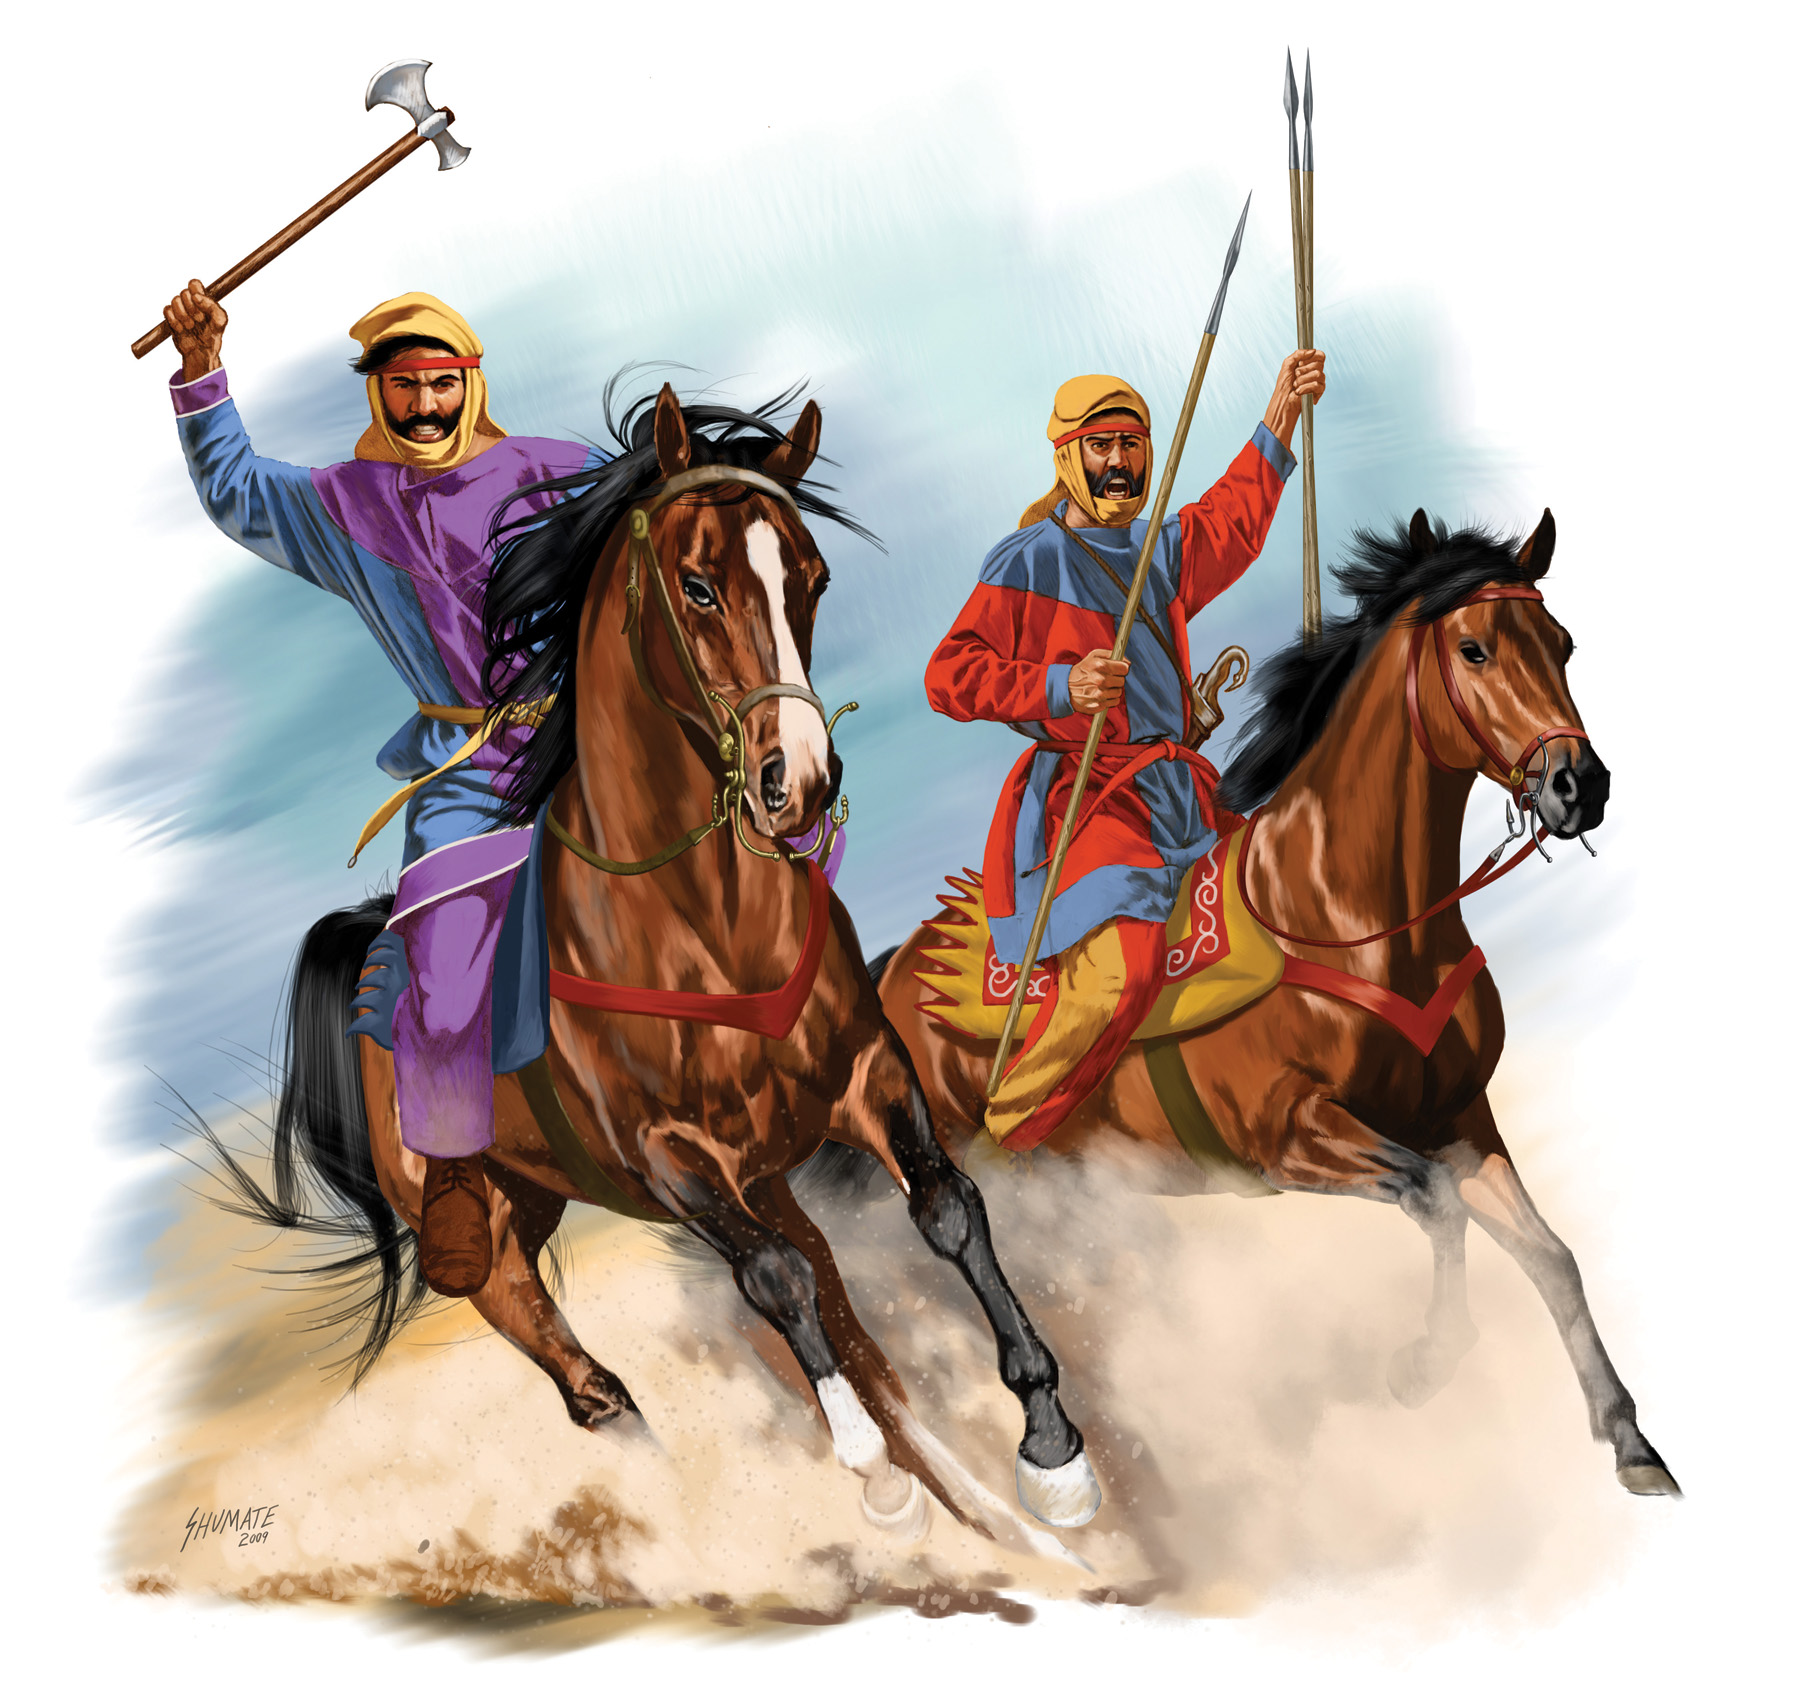 A Macedonian hoplite (left) and Persian cavalryman as they might have appeared at the Battle of Issus. Paintings by historical illustrator Johnny Shumate.